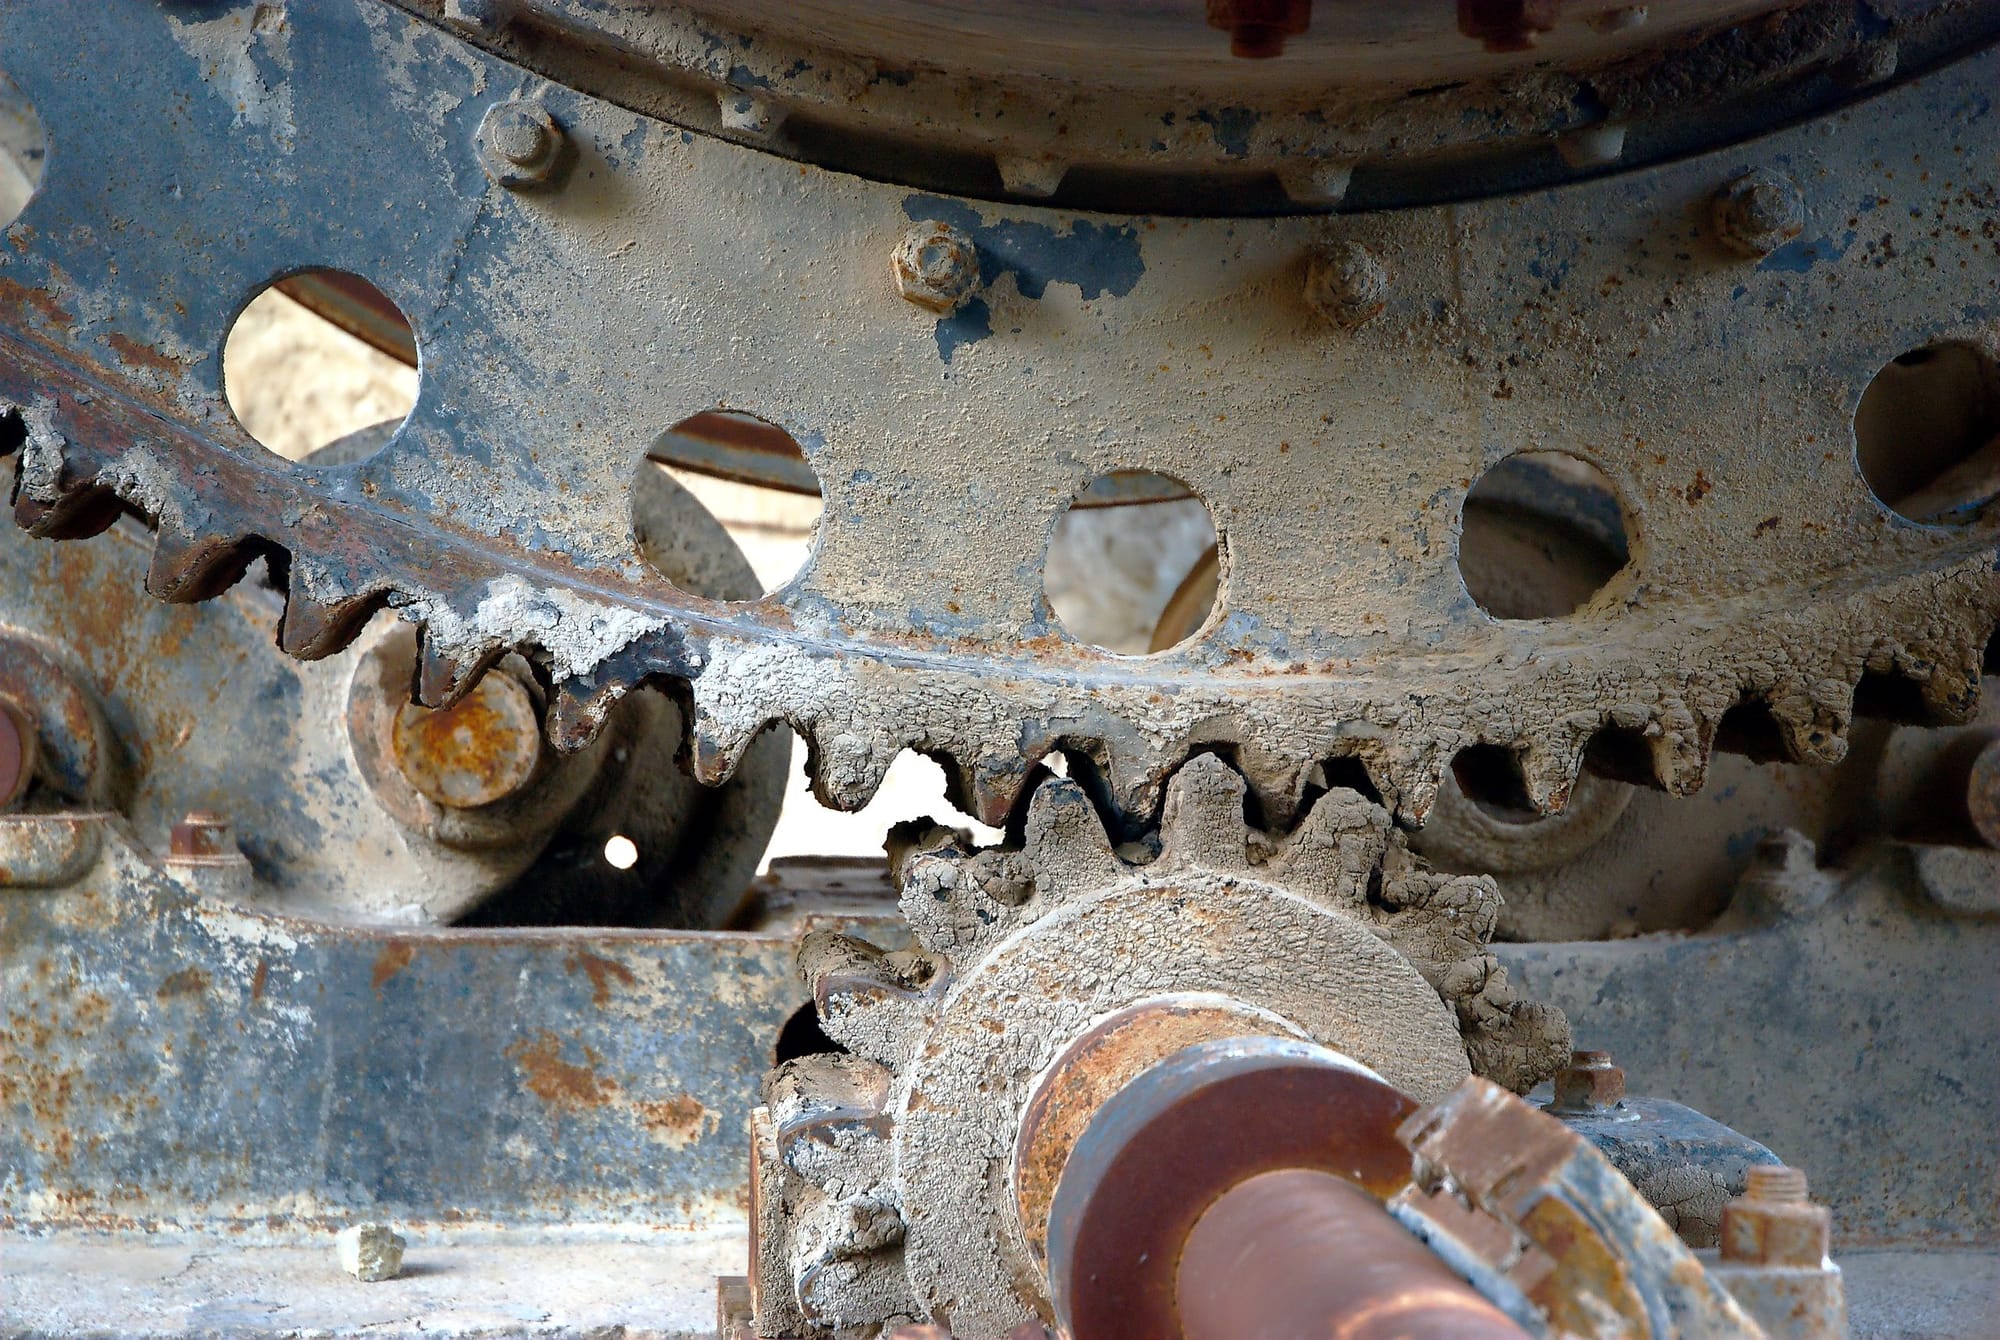 heavy old gears ruined by rust, wear, and concrete stuck in the teeth